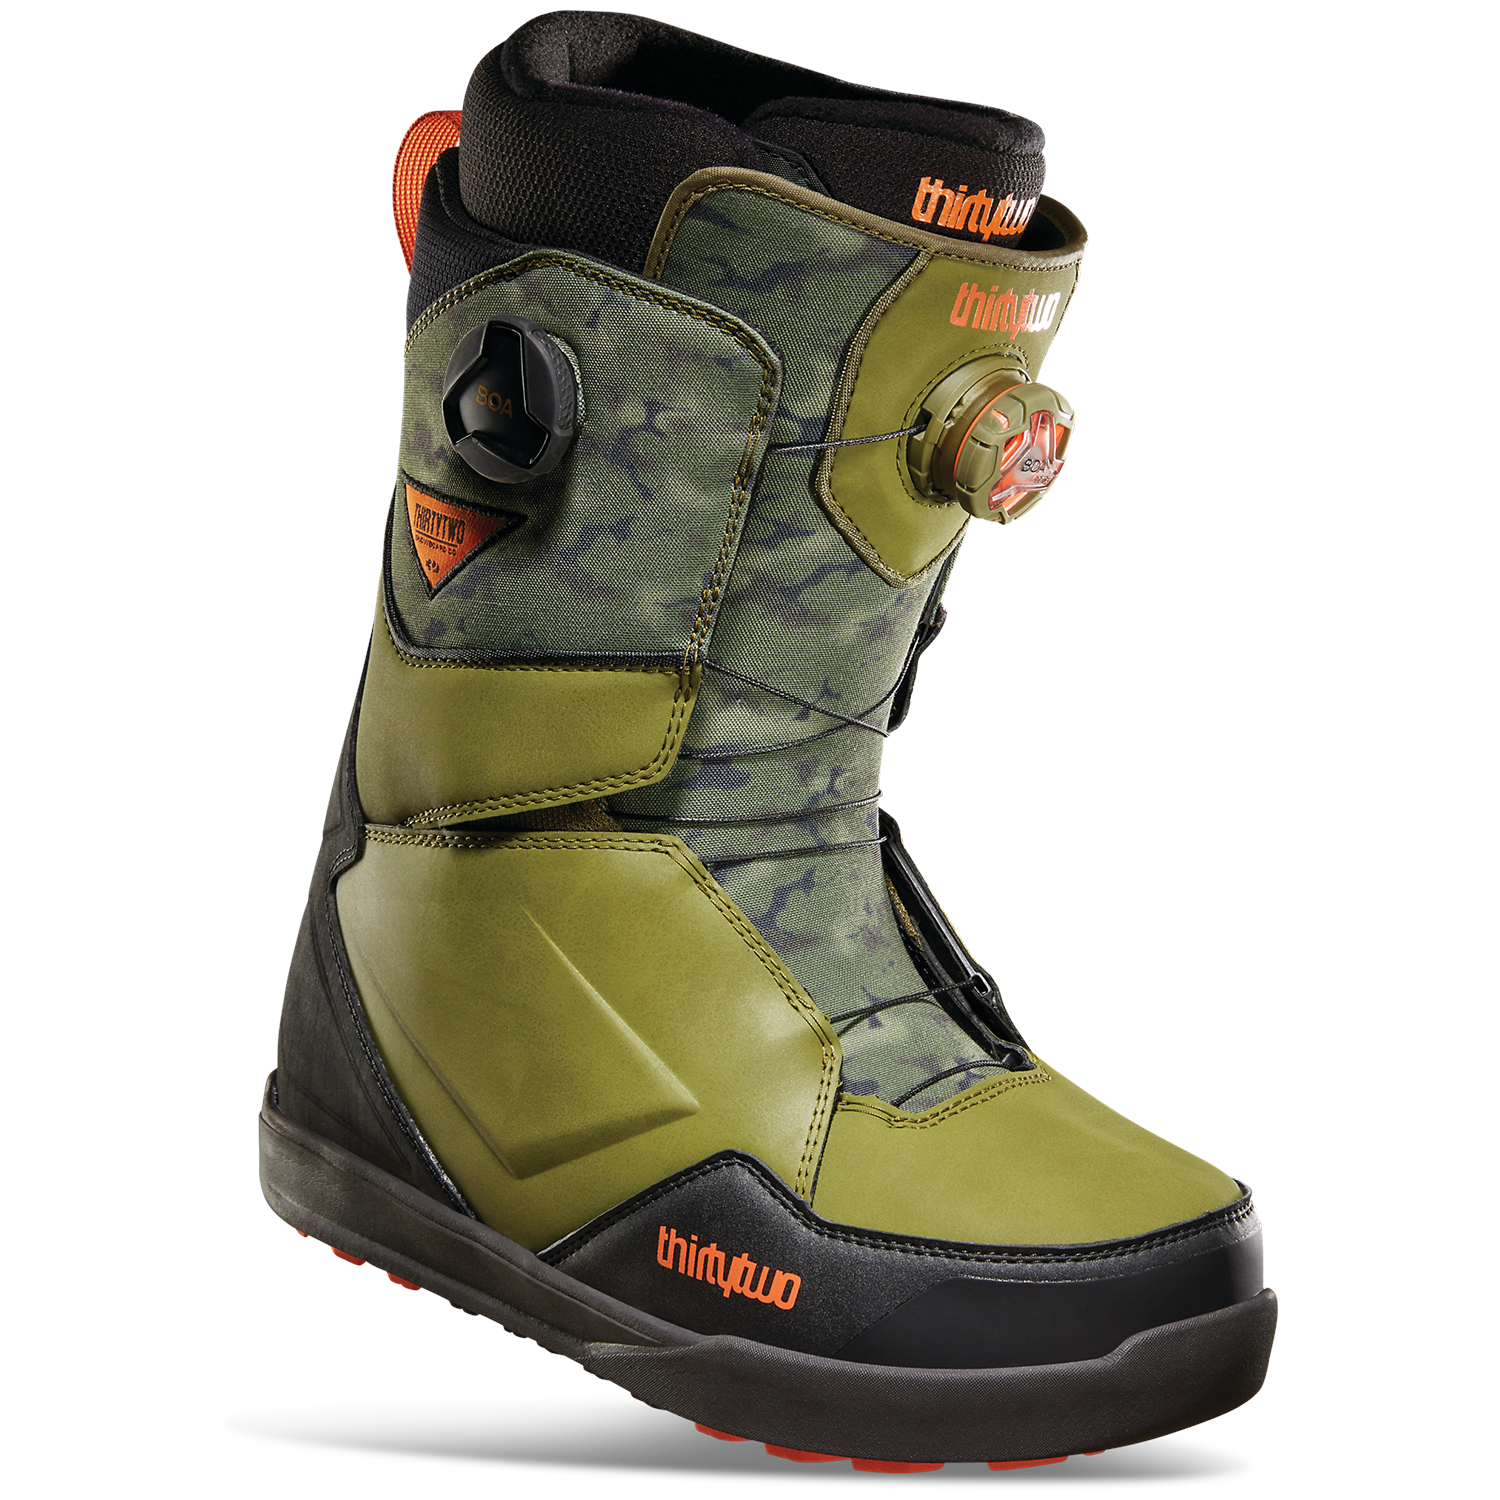 Occupy Overview Outlaw thirtytwo Lashed Double Boa Snowboard Boots | evo